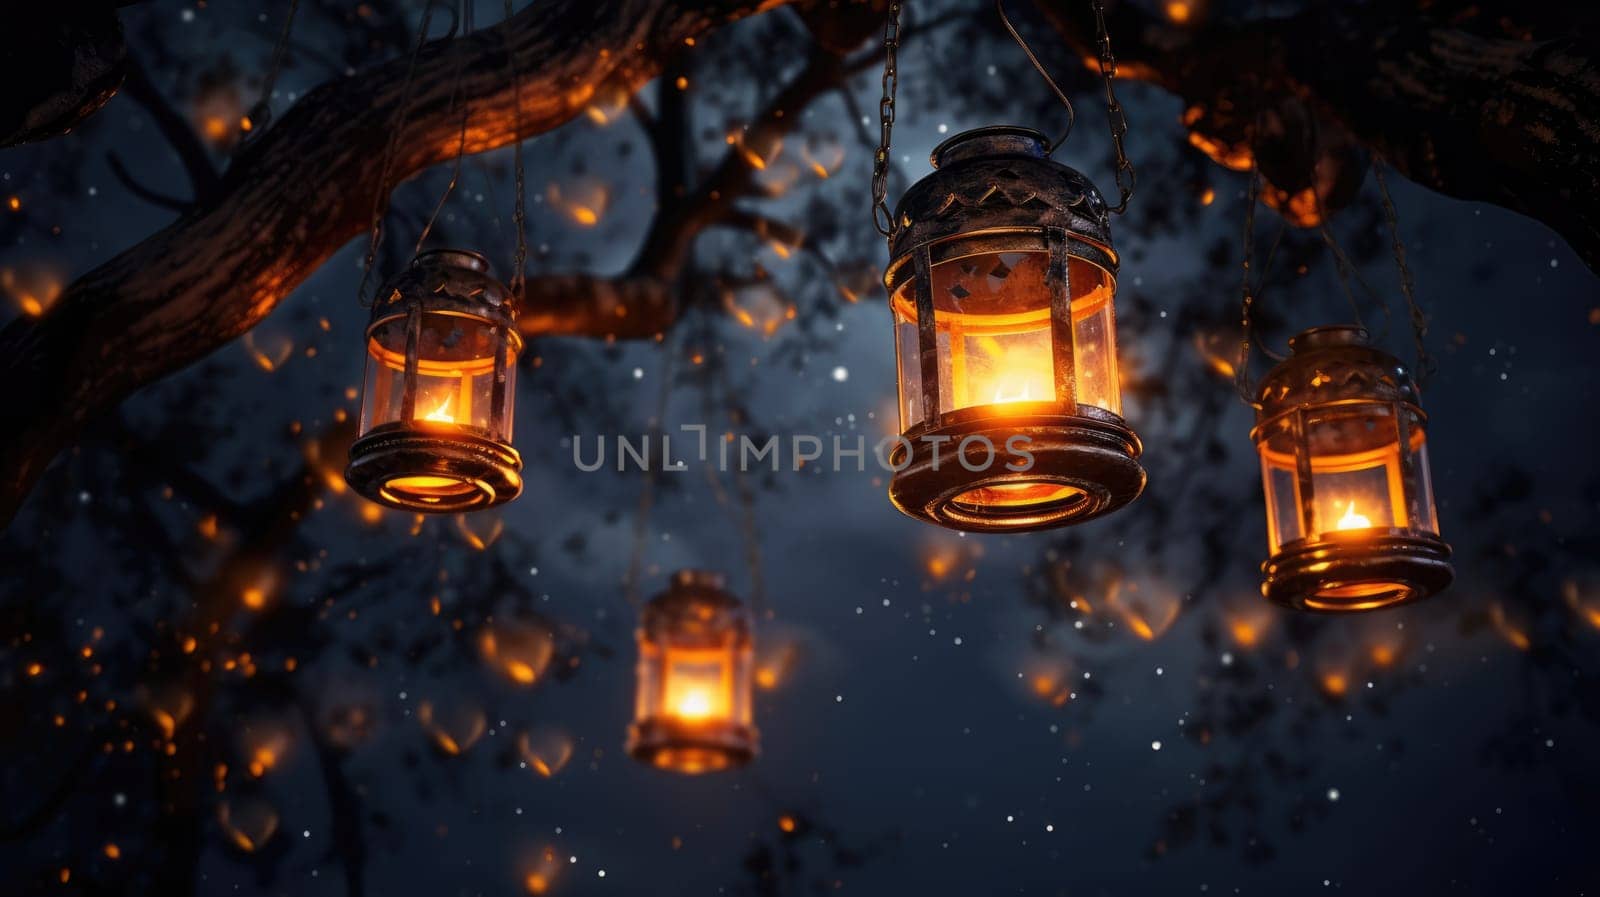 Lantern with night sky. Lantern with candles hanging from branches. Garden decor by natali_brill